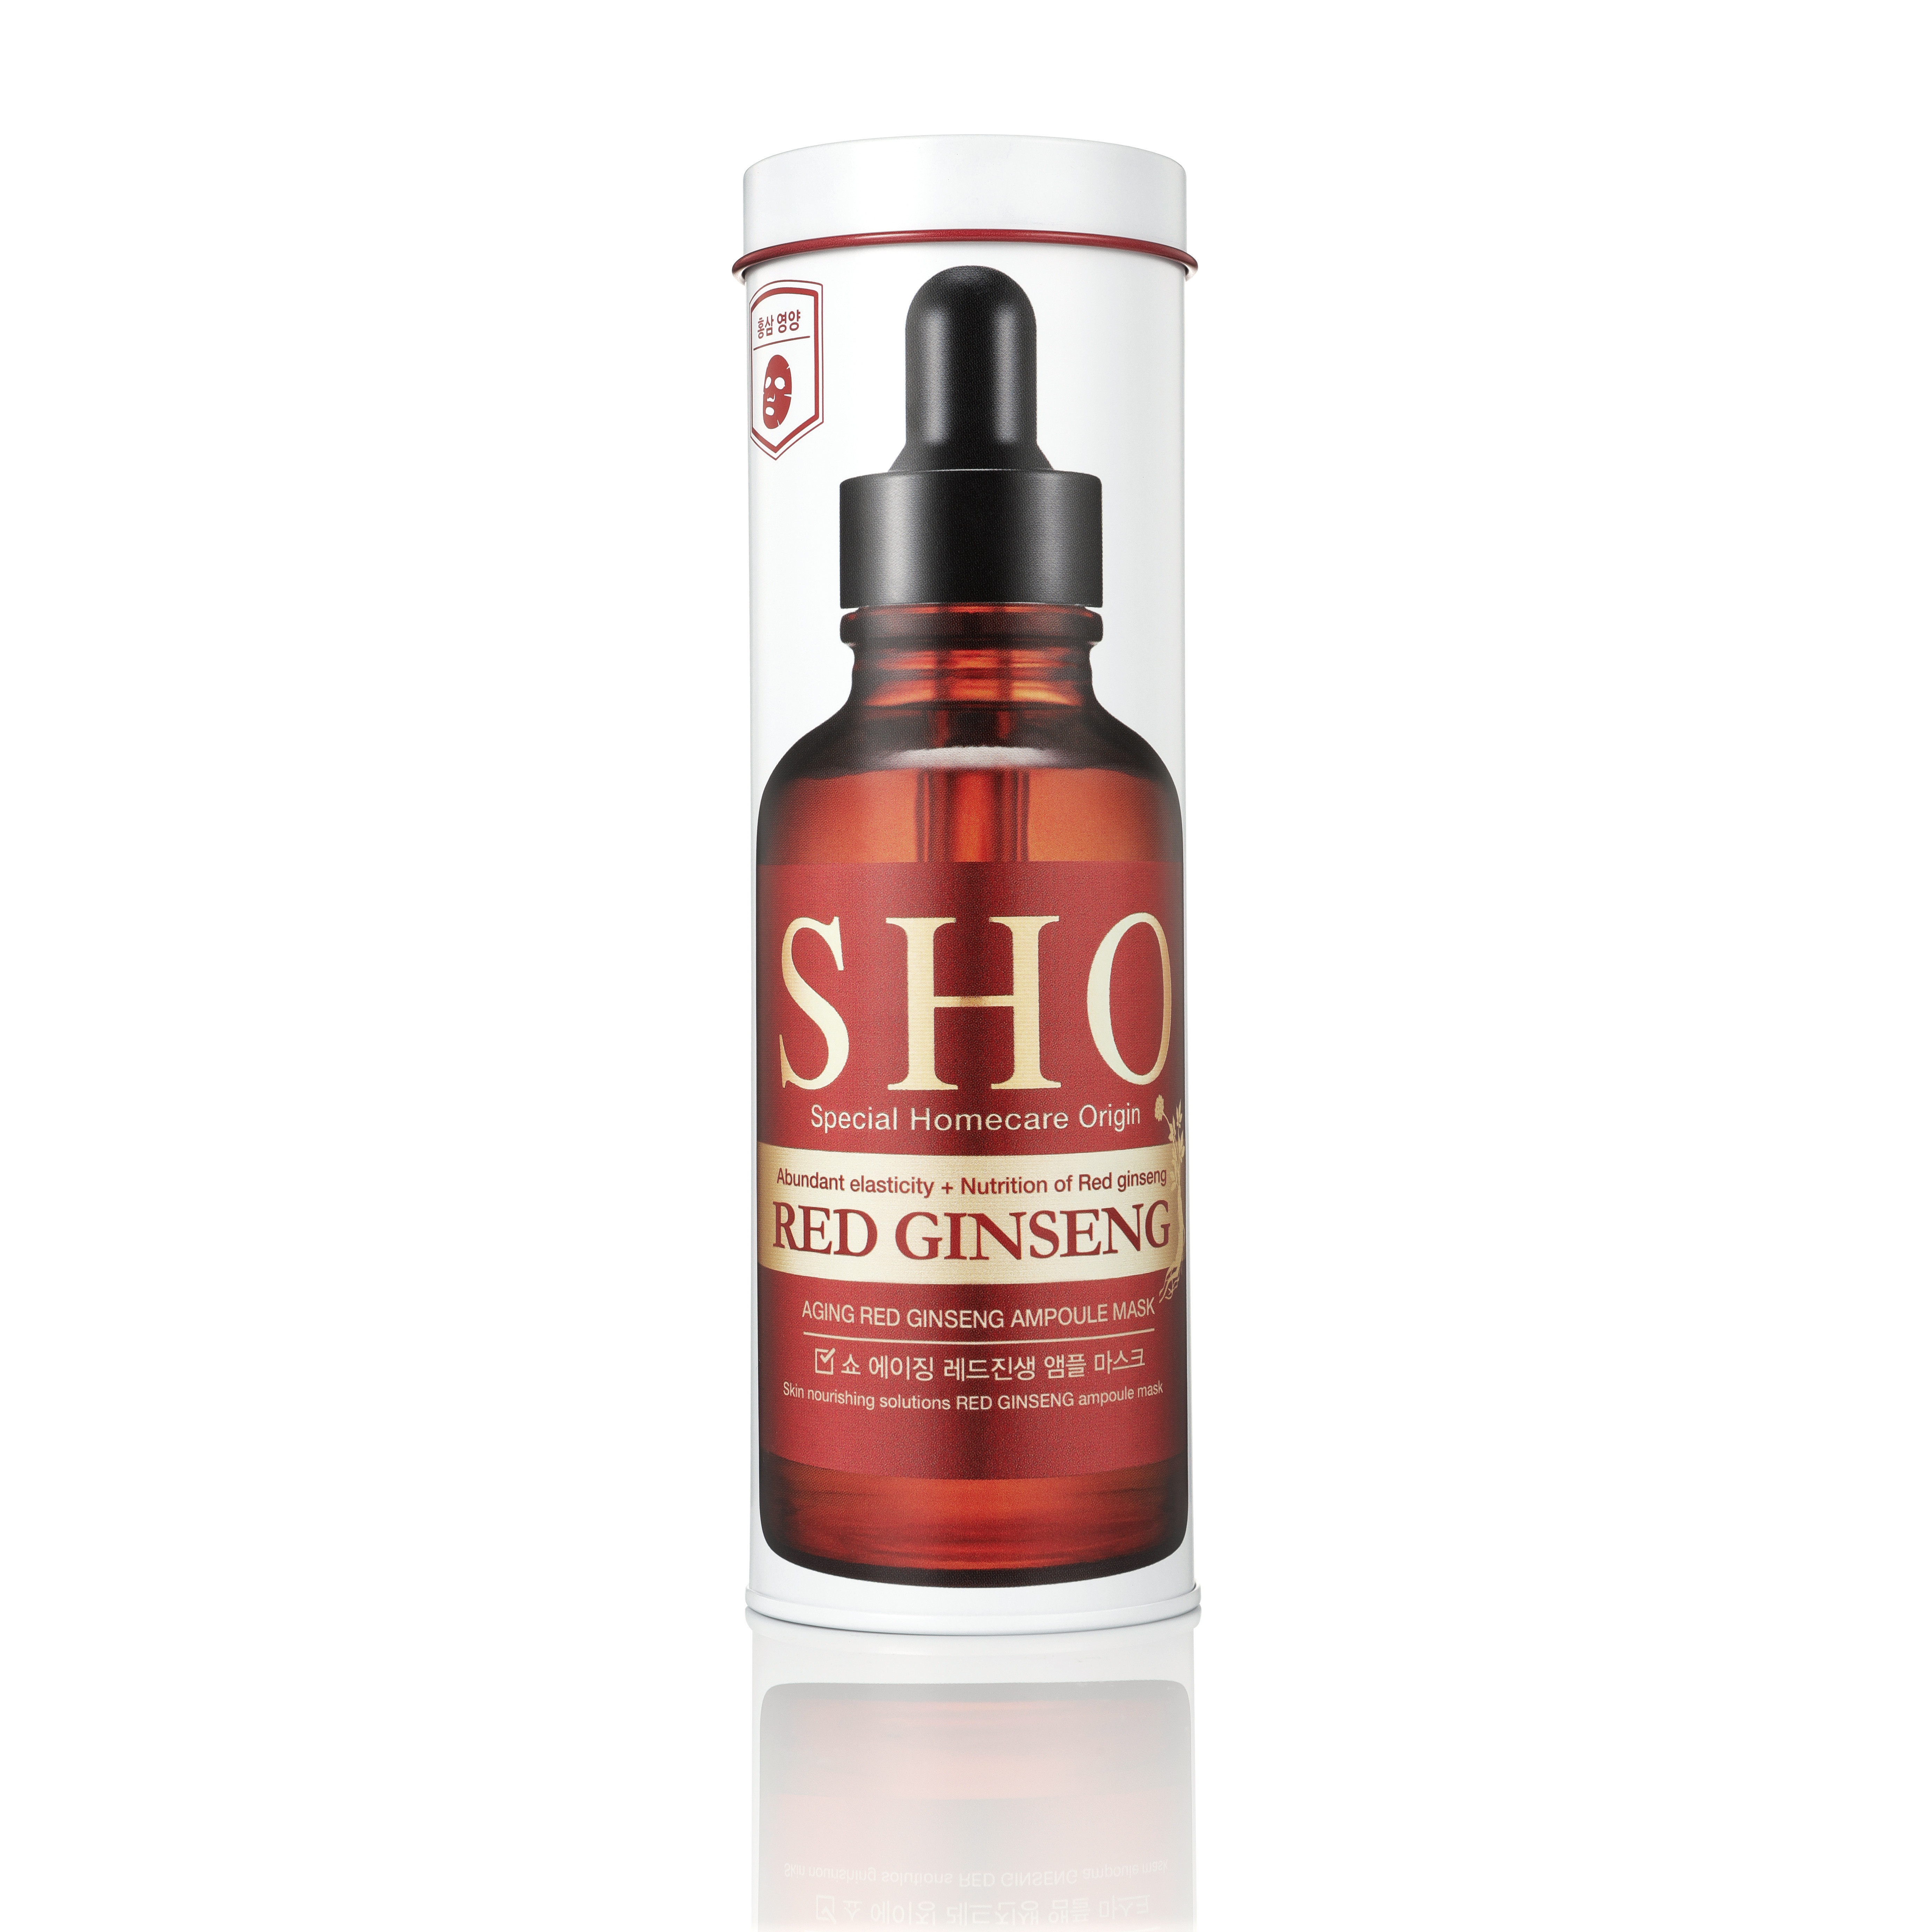 SHO Ampoule Mask Chống lão hóa hồng sâm - Hộp 7 miếng Mặt nạ SHO Red Ginseng Aging Ampoule Mask (27ml/miếng)